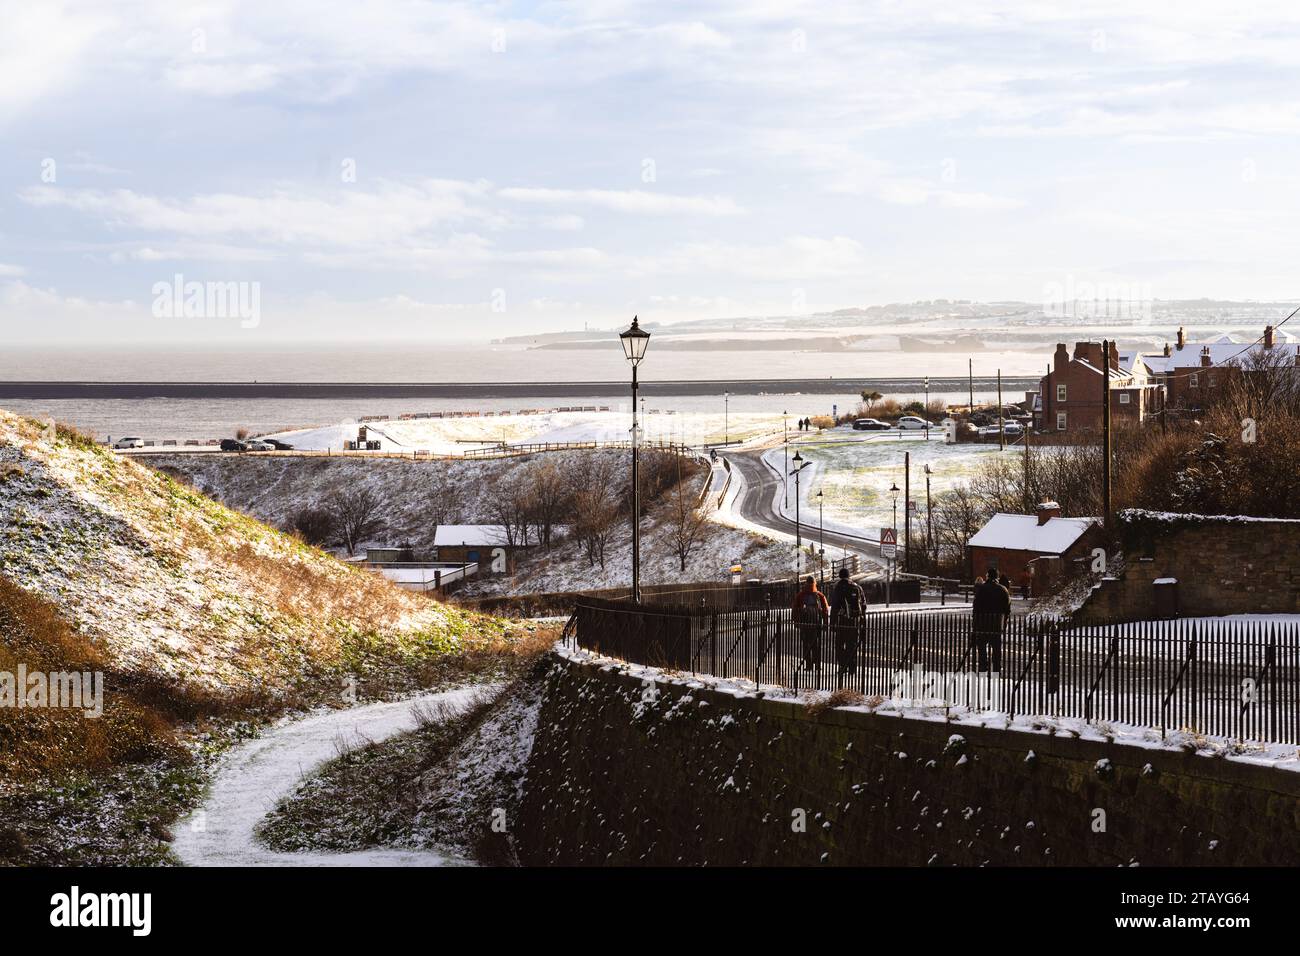 The View of the River Tyne and beyond to South Shields from the top of the Tynemouth Castle snowy mound Stock Photo